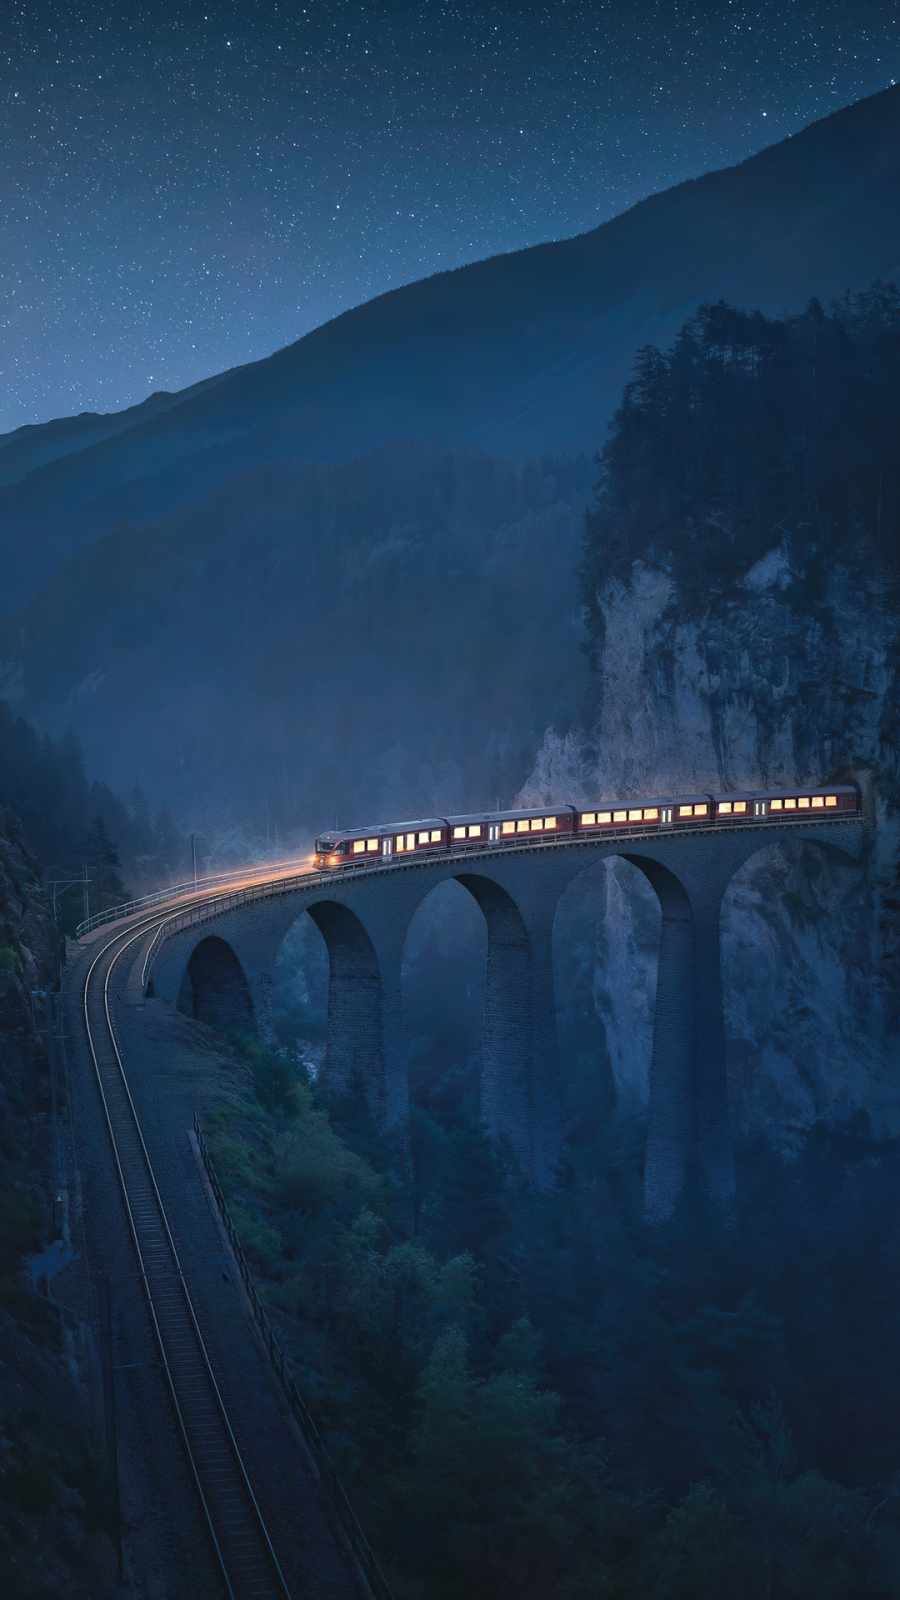 train coming out of tunnel